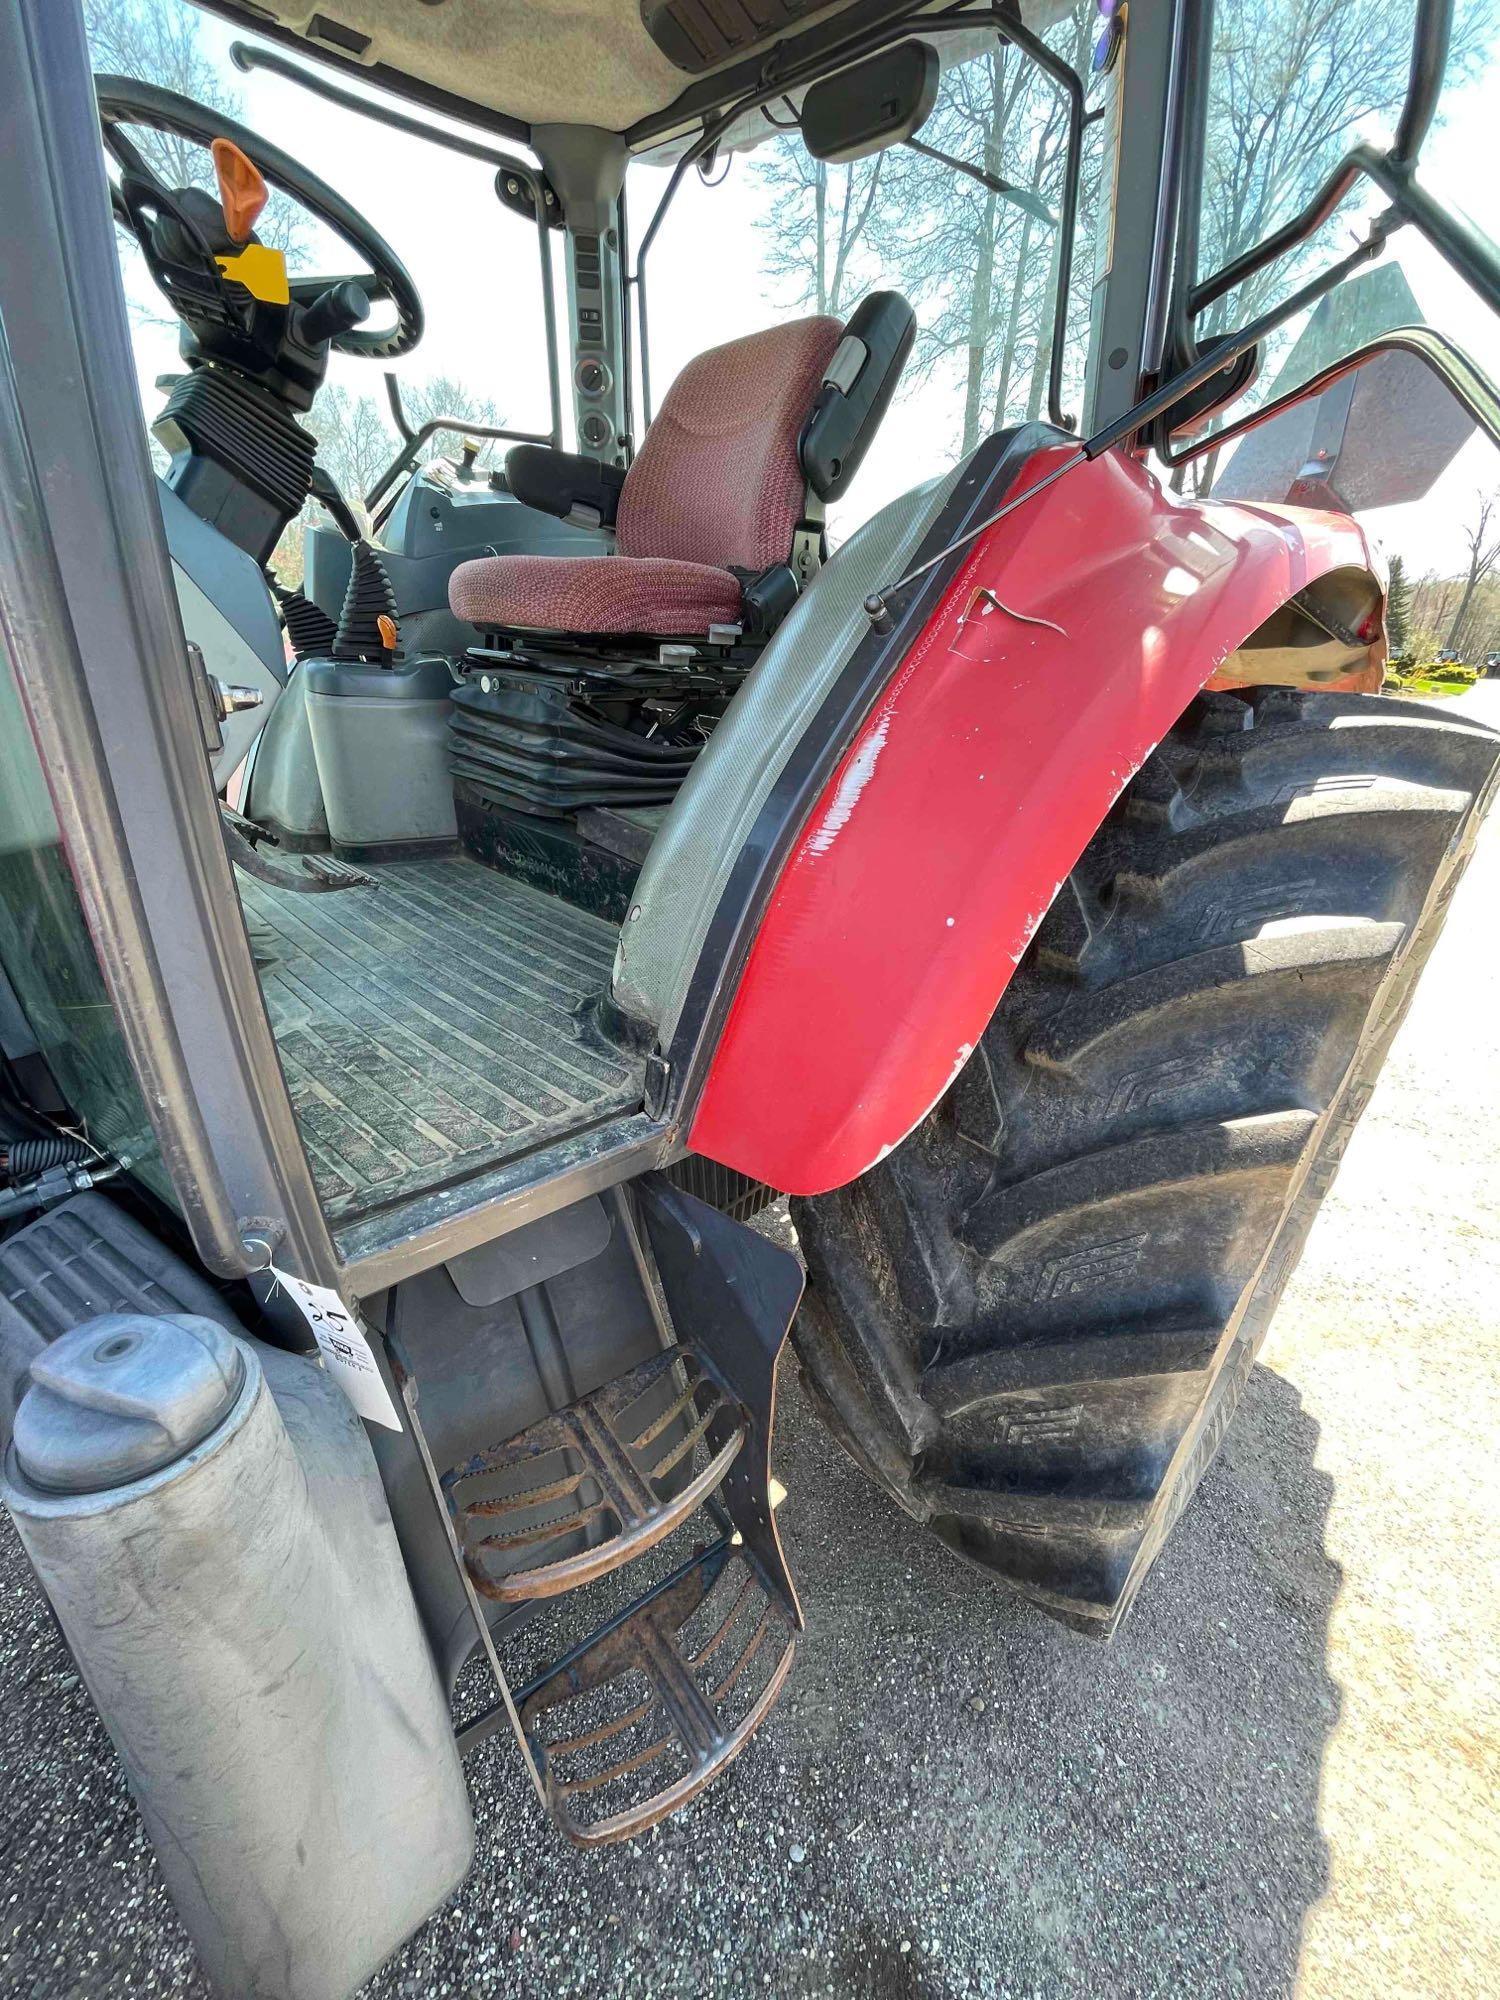 McCormick X60.20 with 3,259 hrs Cab air, MFWD